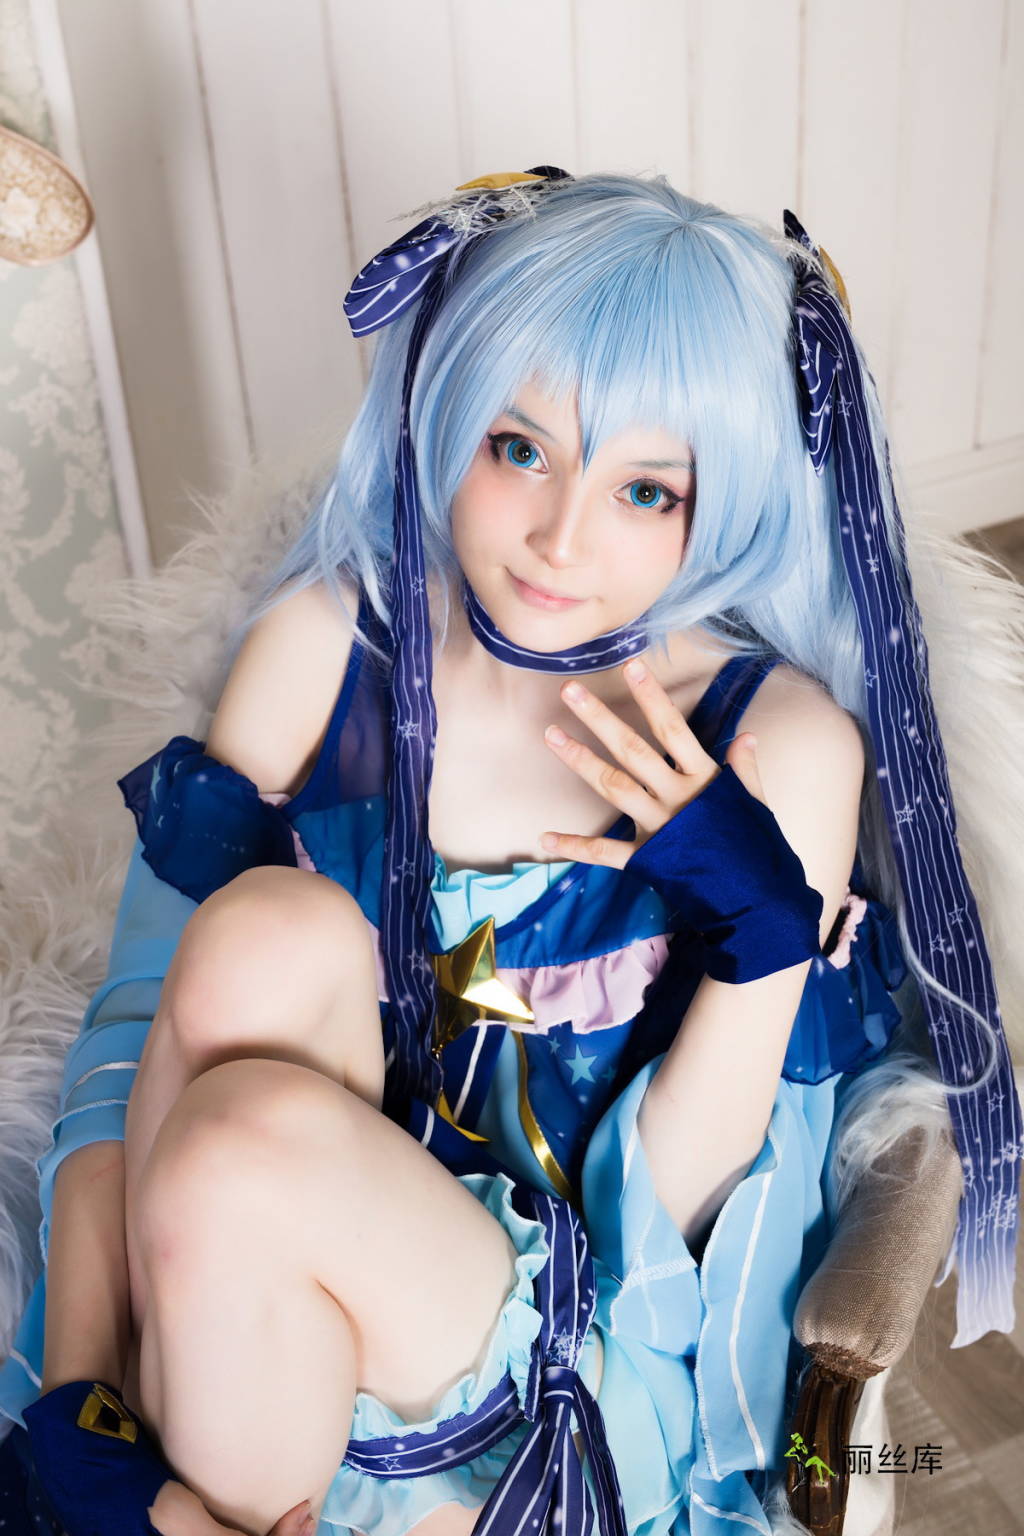 ˹coser RocksyLight Unknown (Vocaloid maybe)_˿